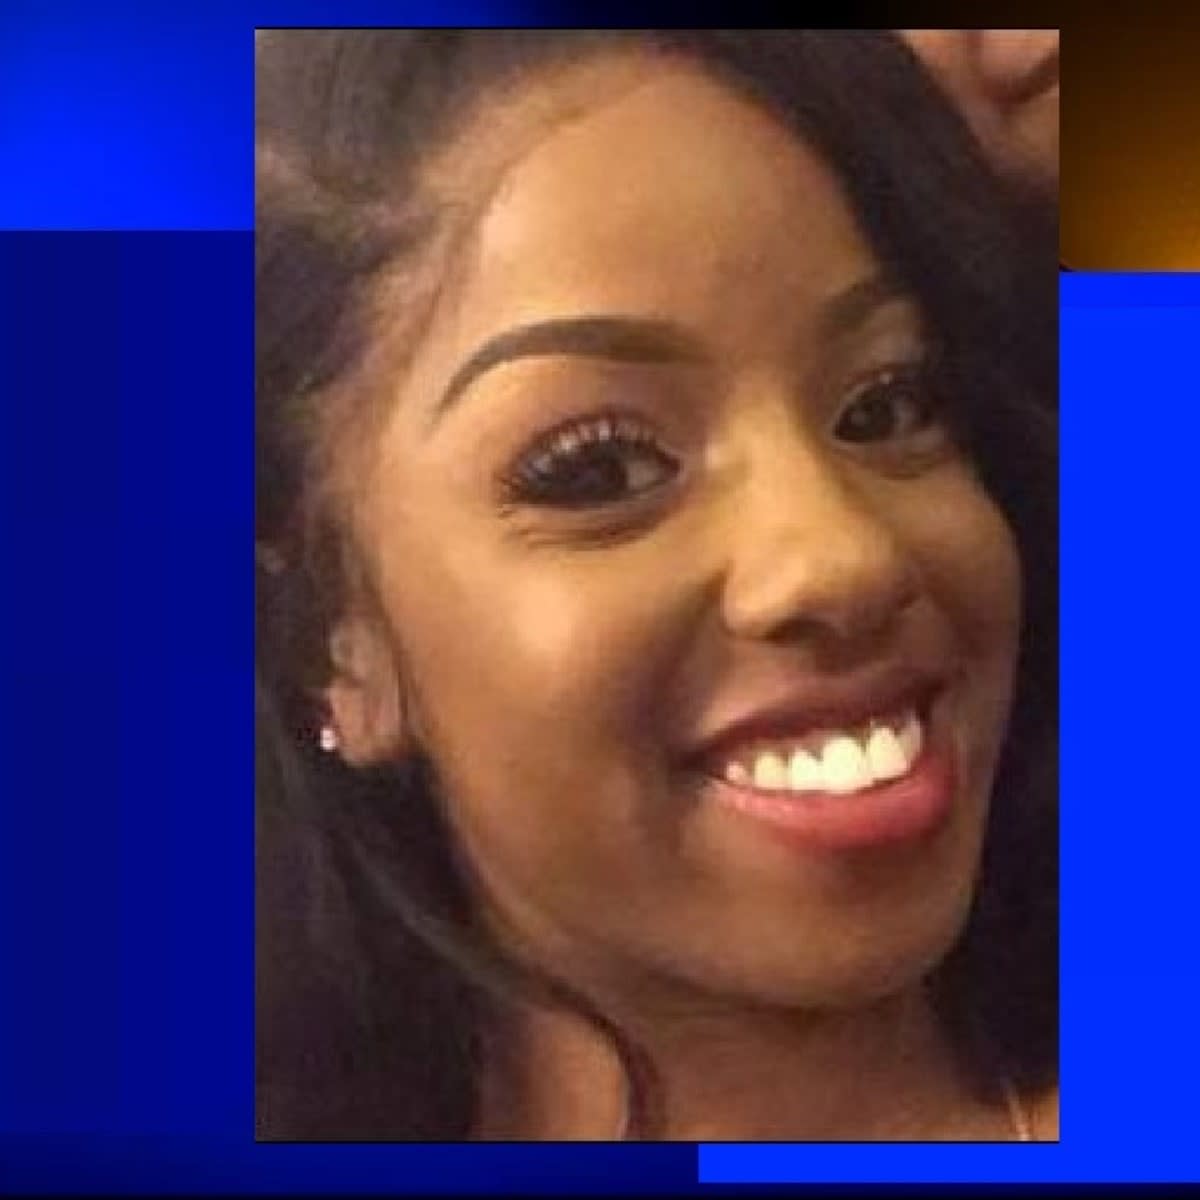 Ariel Callaway was hit by a stray bullet and killed during a shoot out